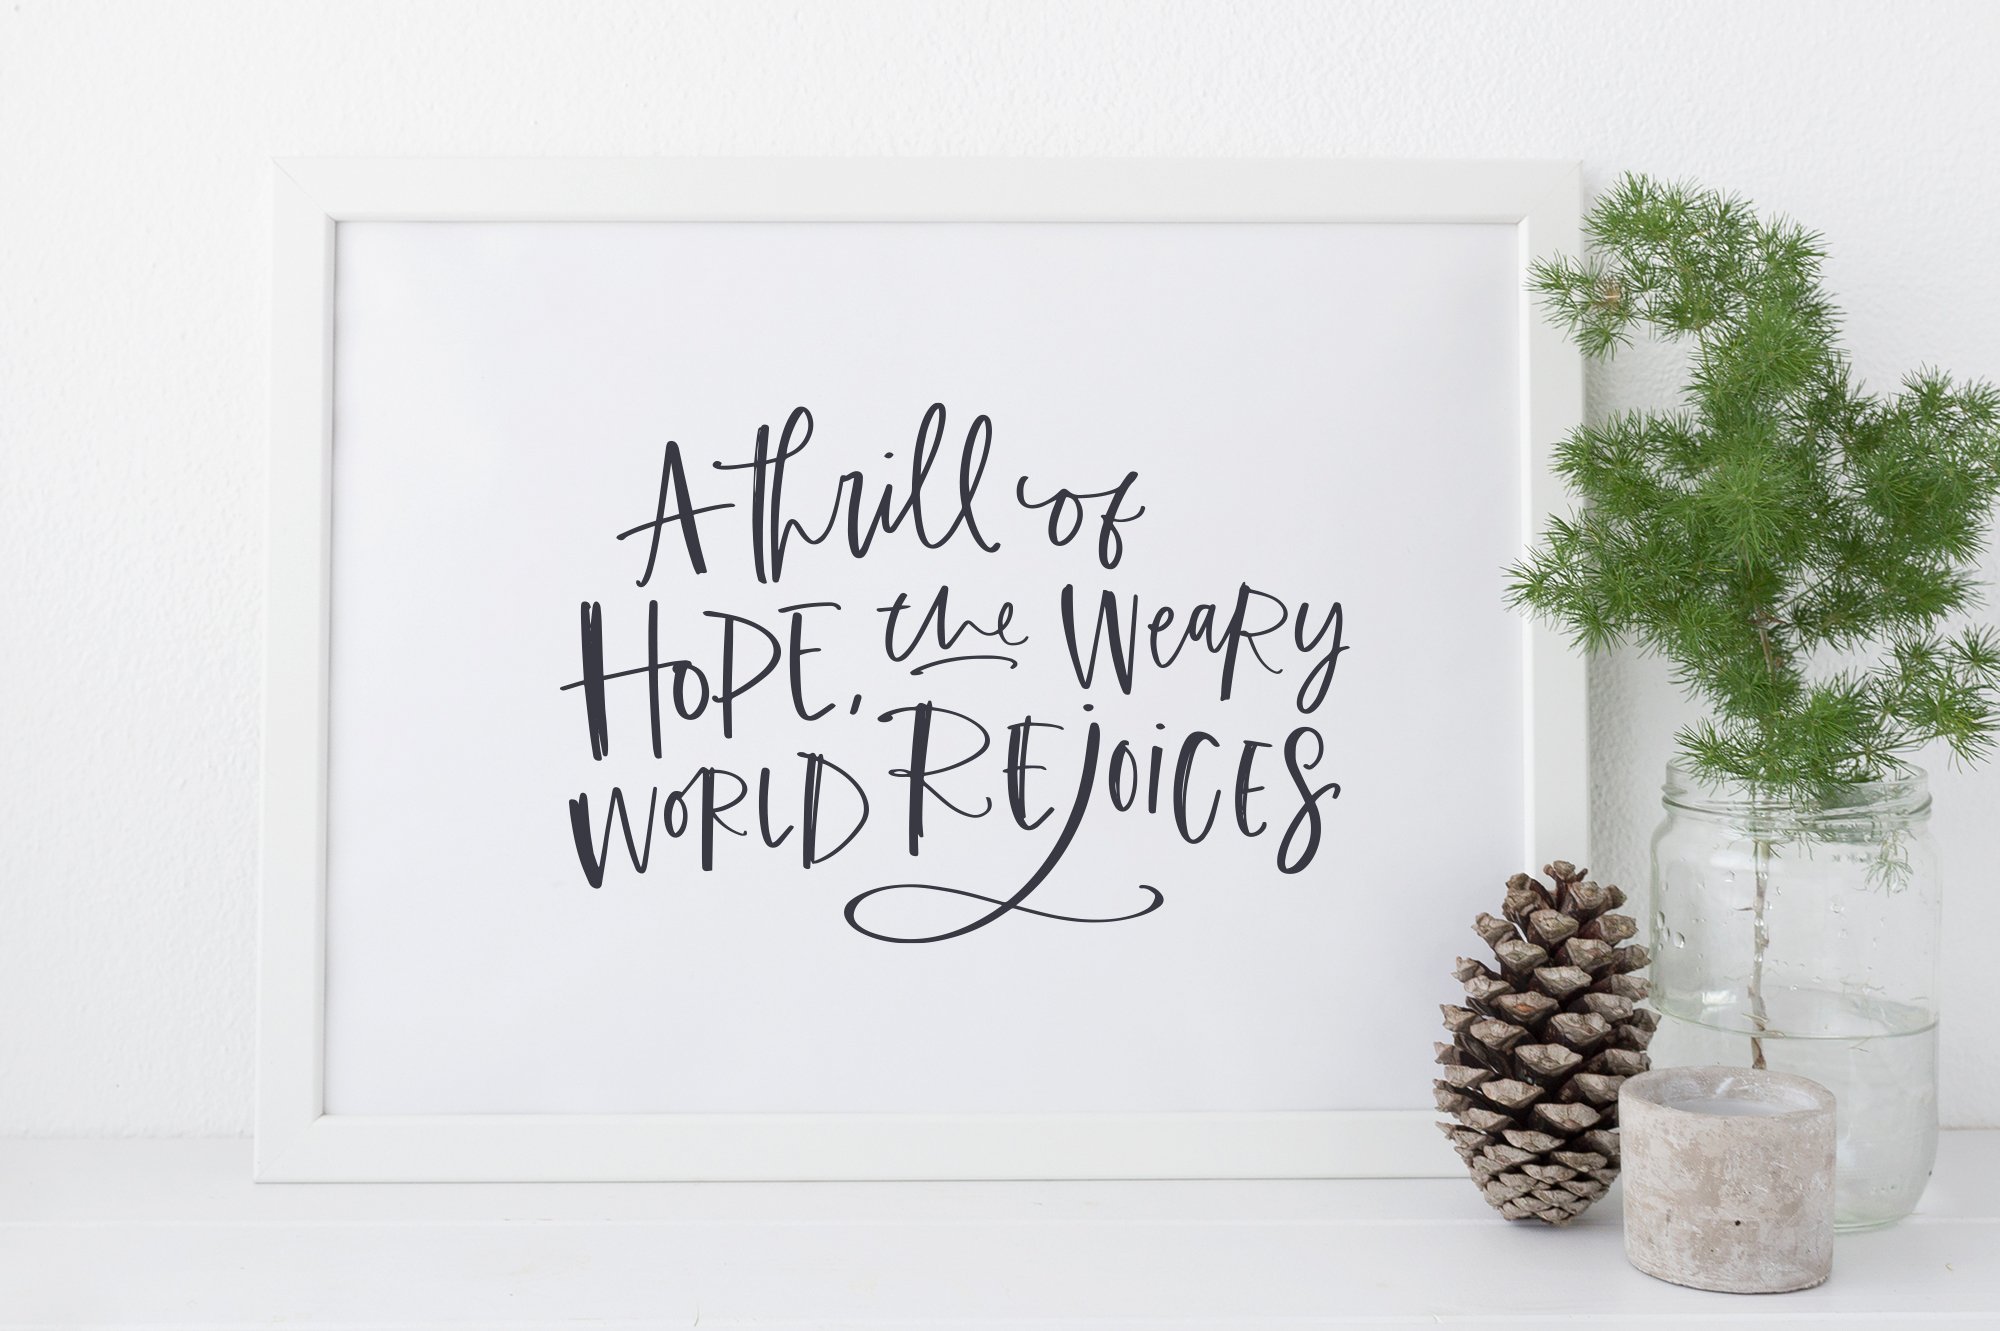 Merry & Bright Holiday Lettering Kit